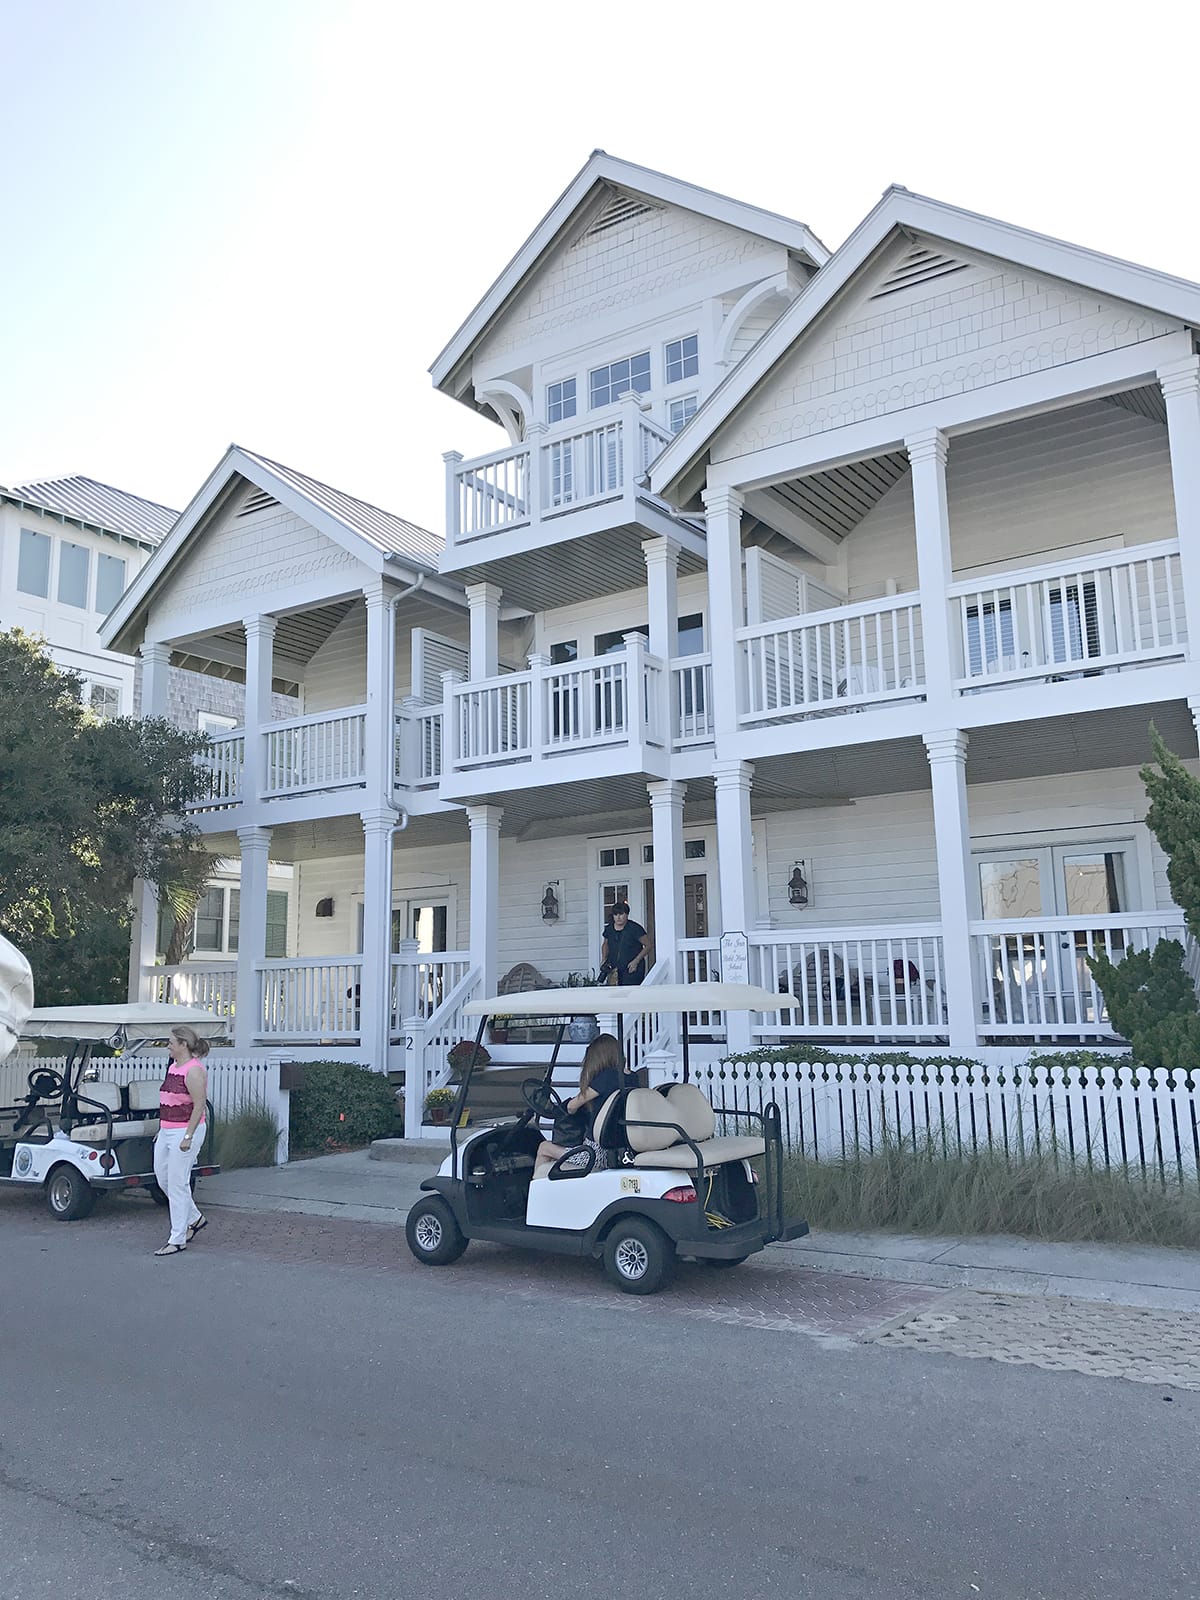 front view of The Inn At Bald Head Island